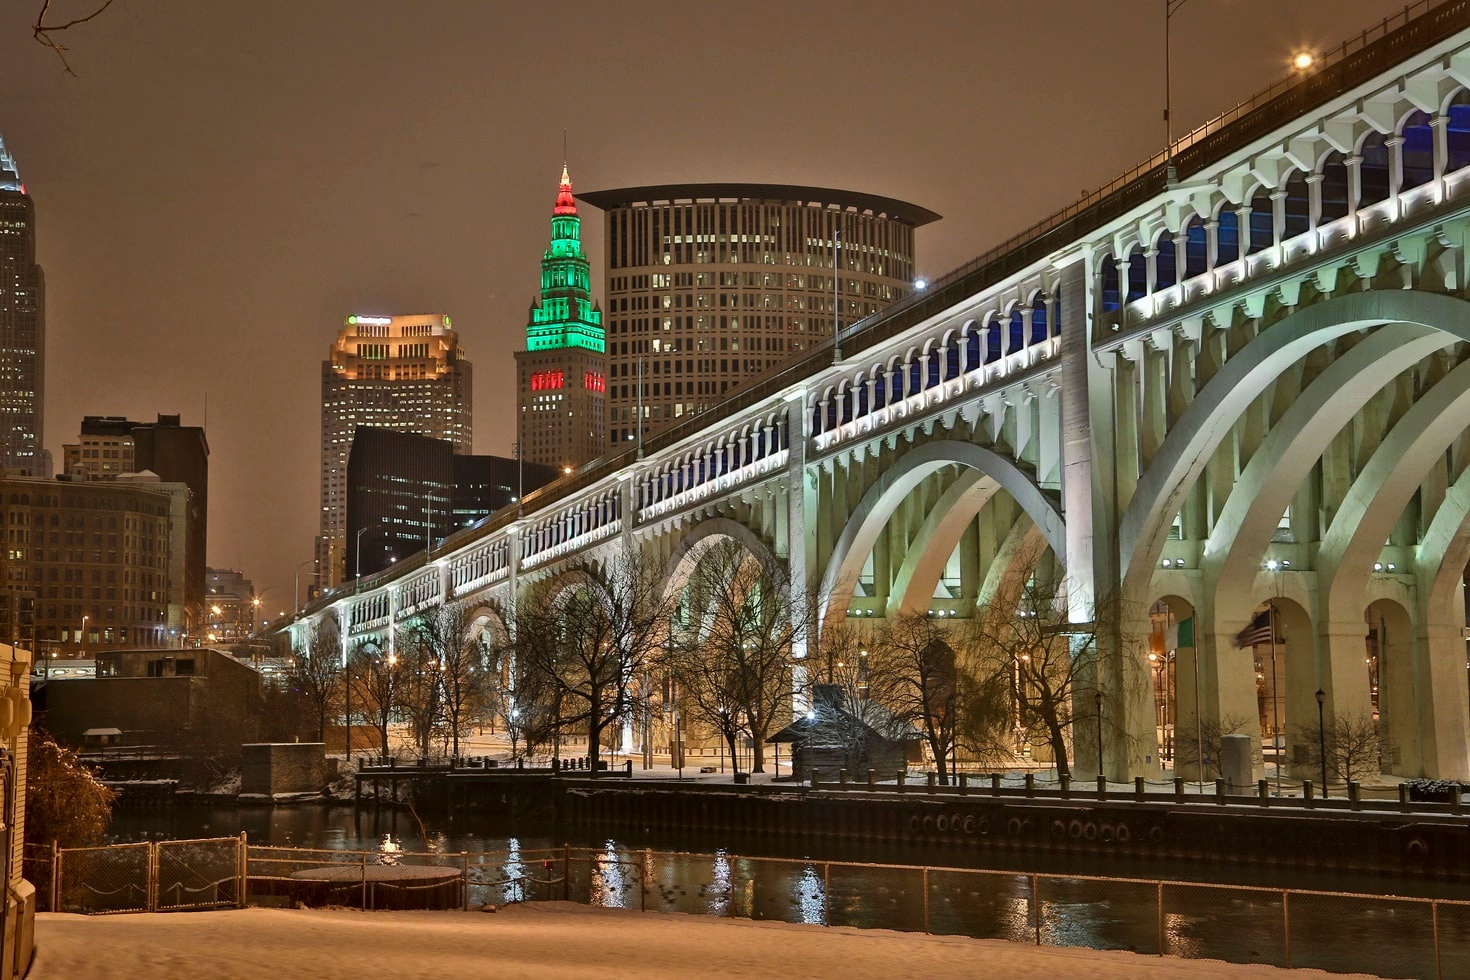 Downtown Cleveland at night | Cleveland City Guide